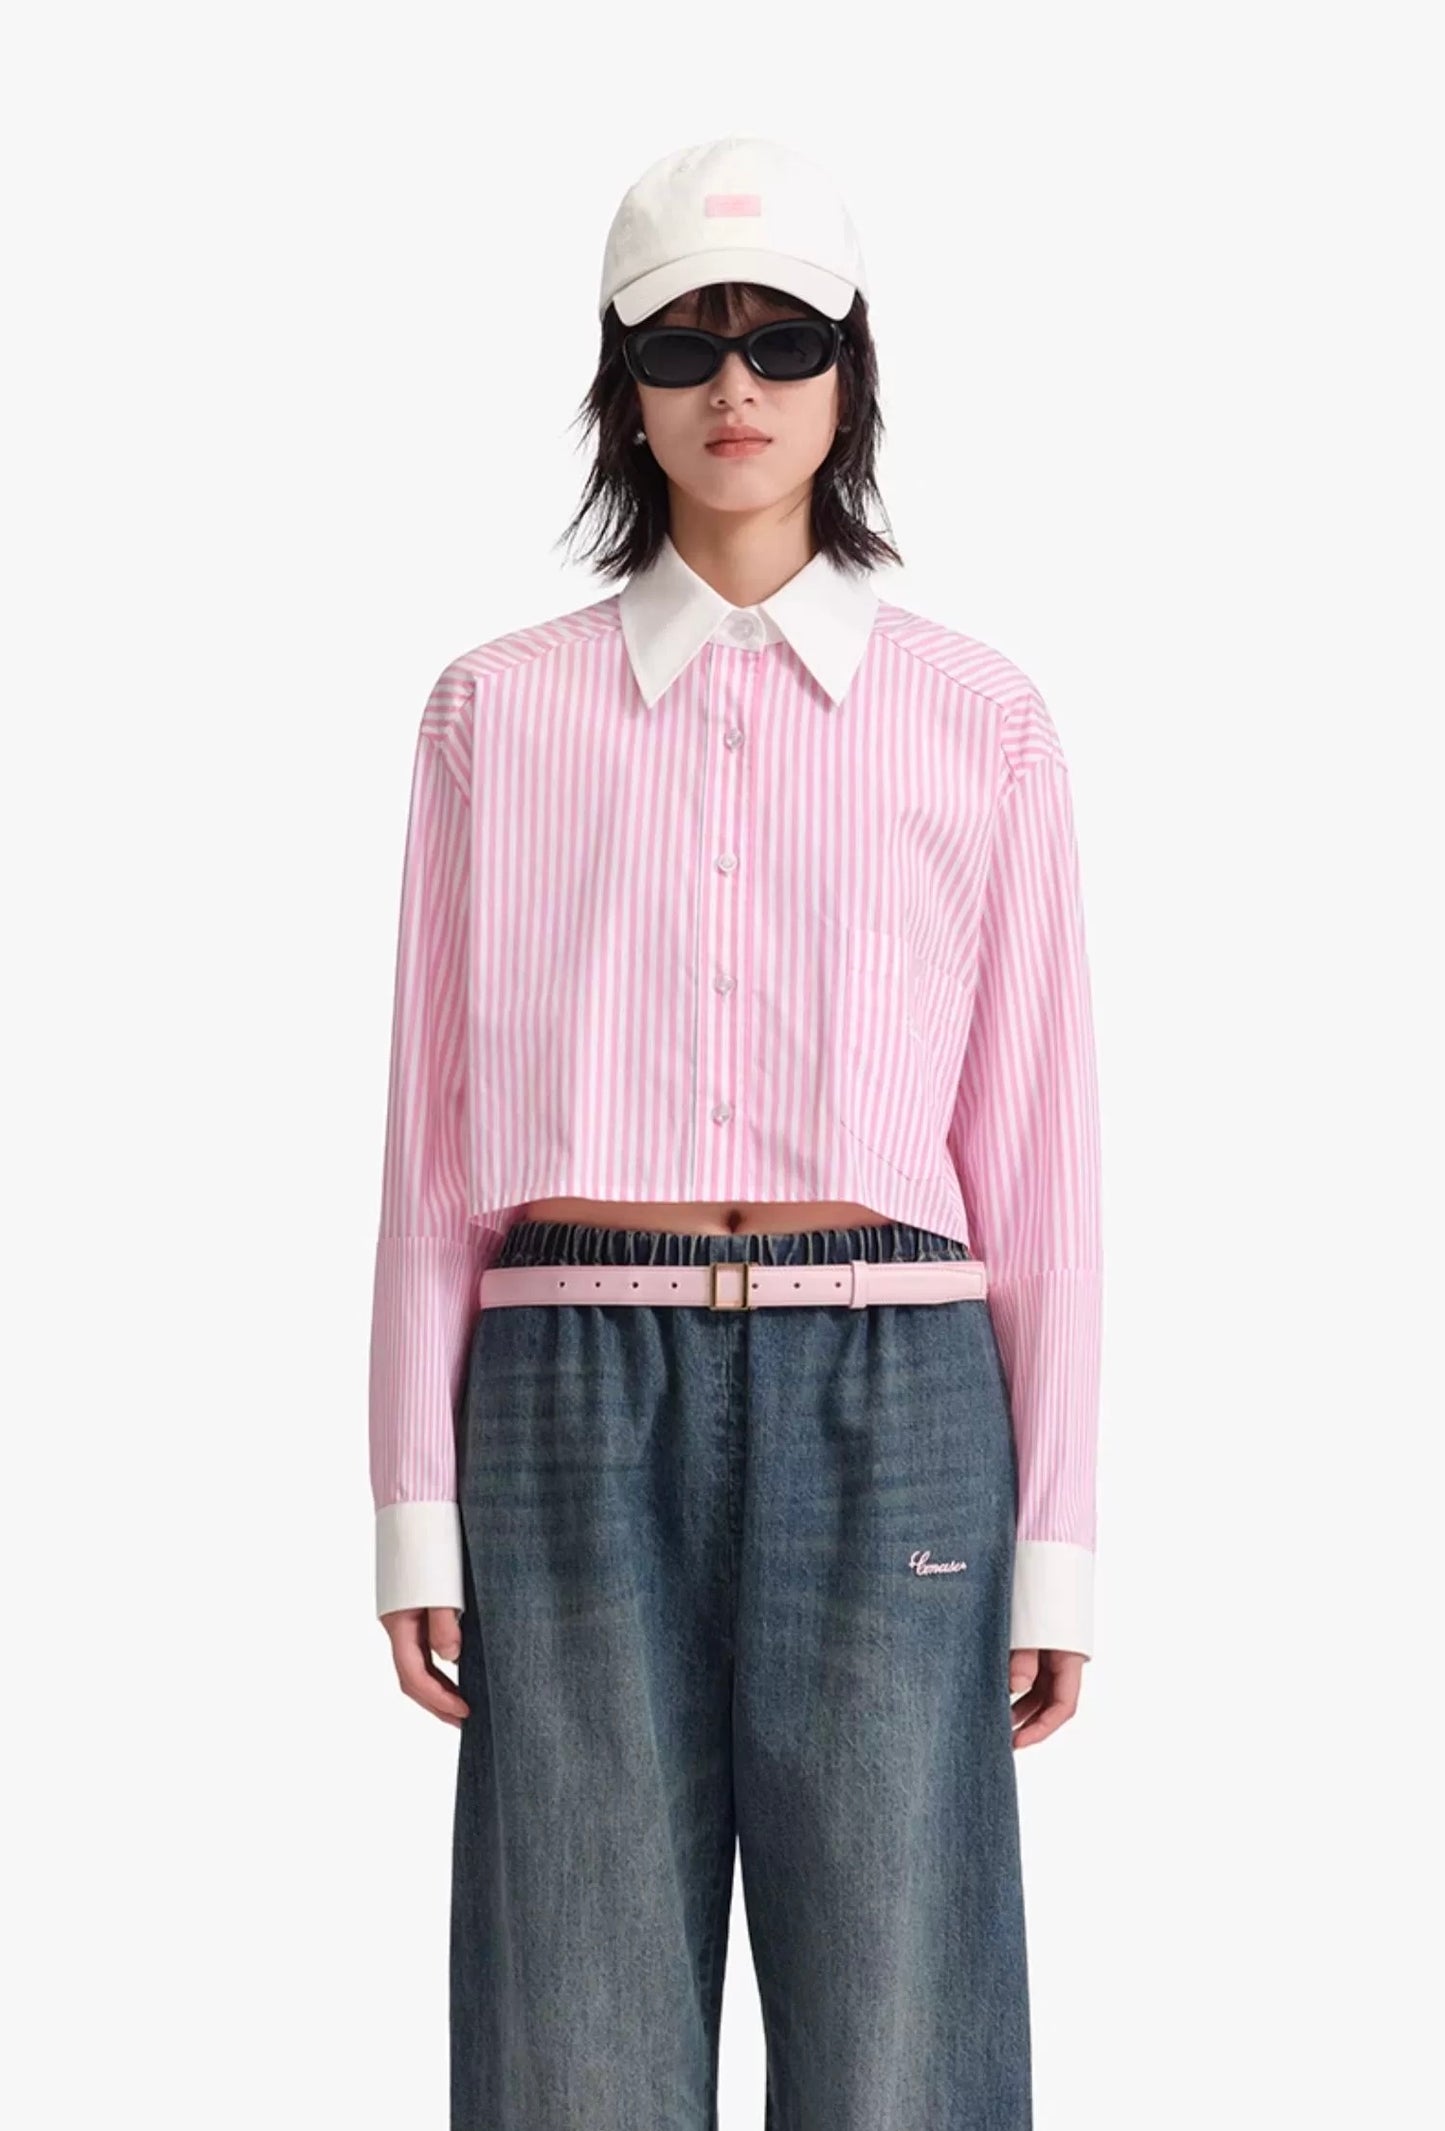 Concise-White Color Block Striped Short Shirt Pink